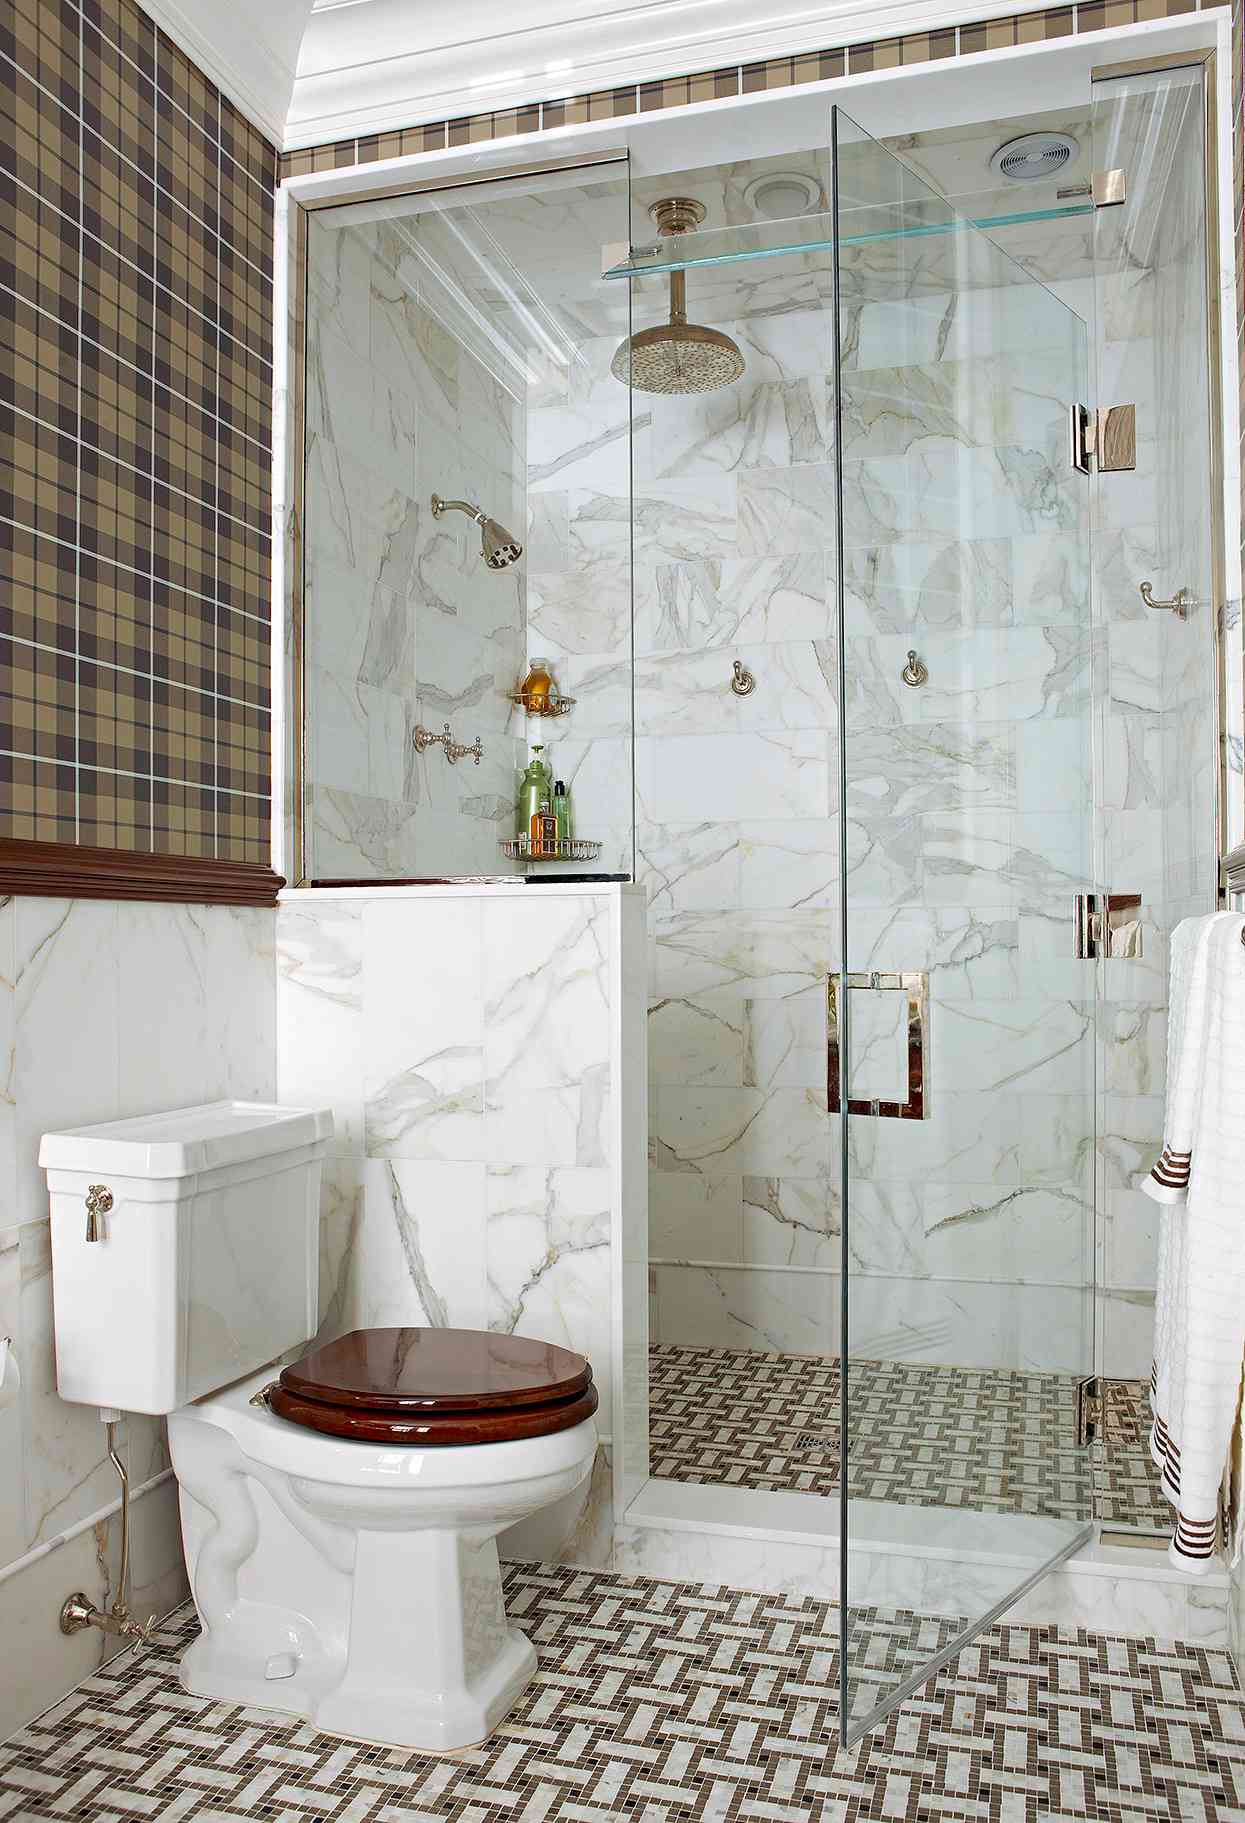 spacious walk-in shower with marble walls and warm tones